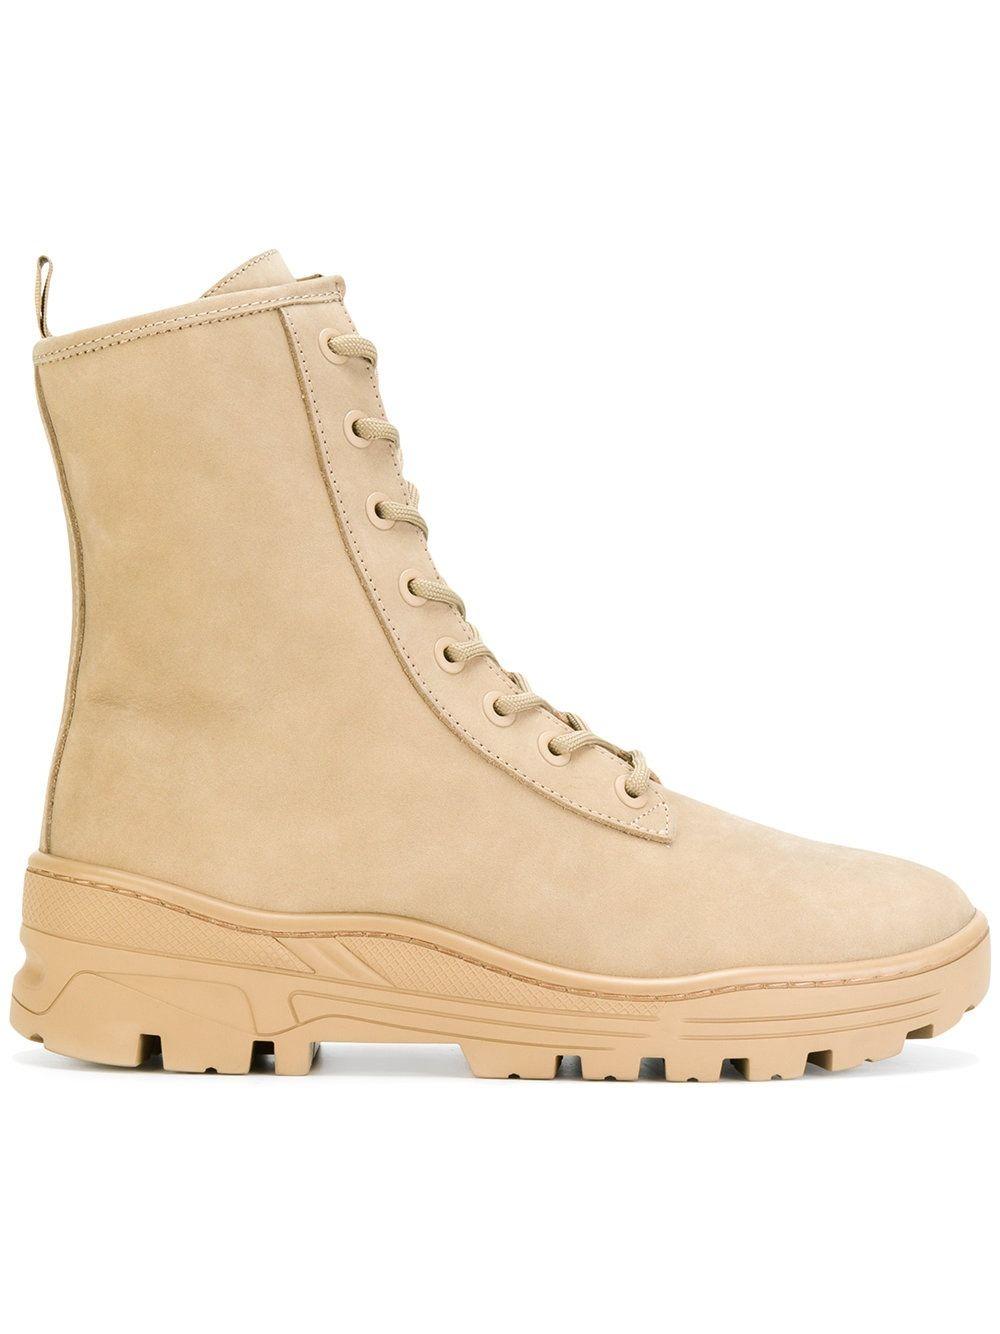 Yeezy Nubuk Military Boots in Natural for Men | Lyst